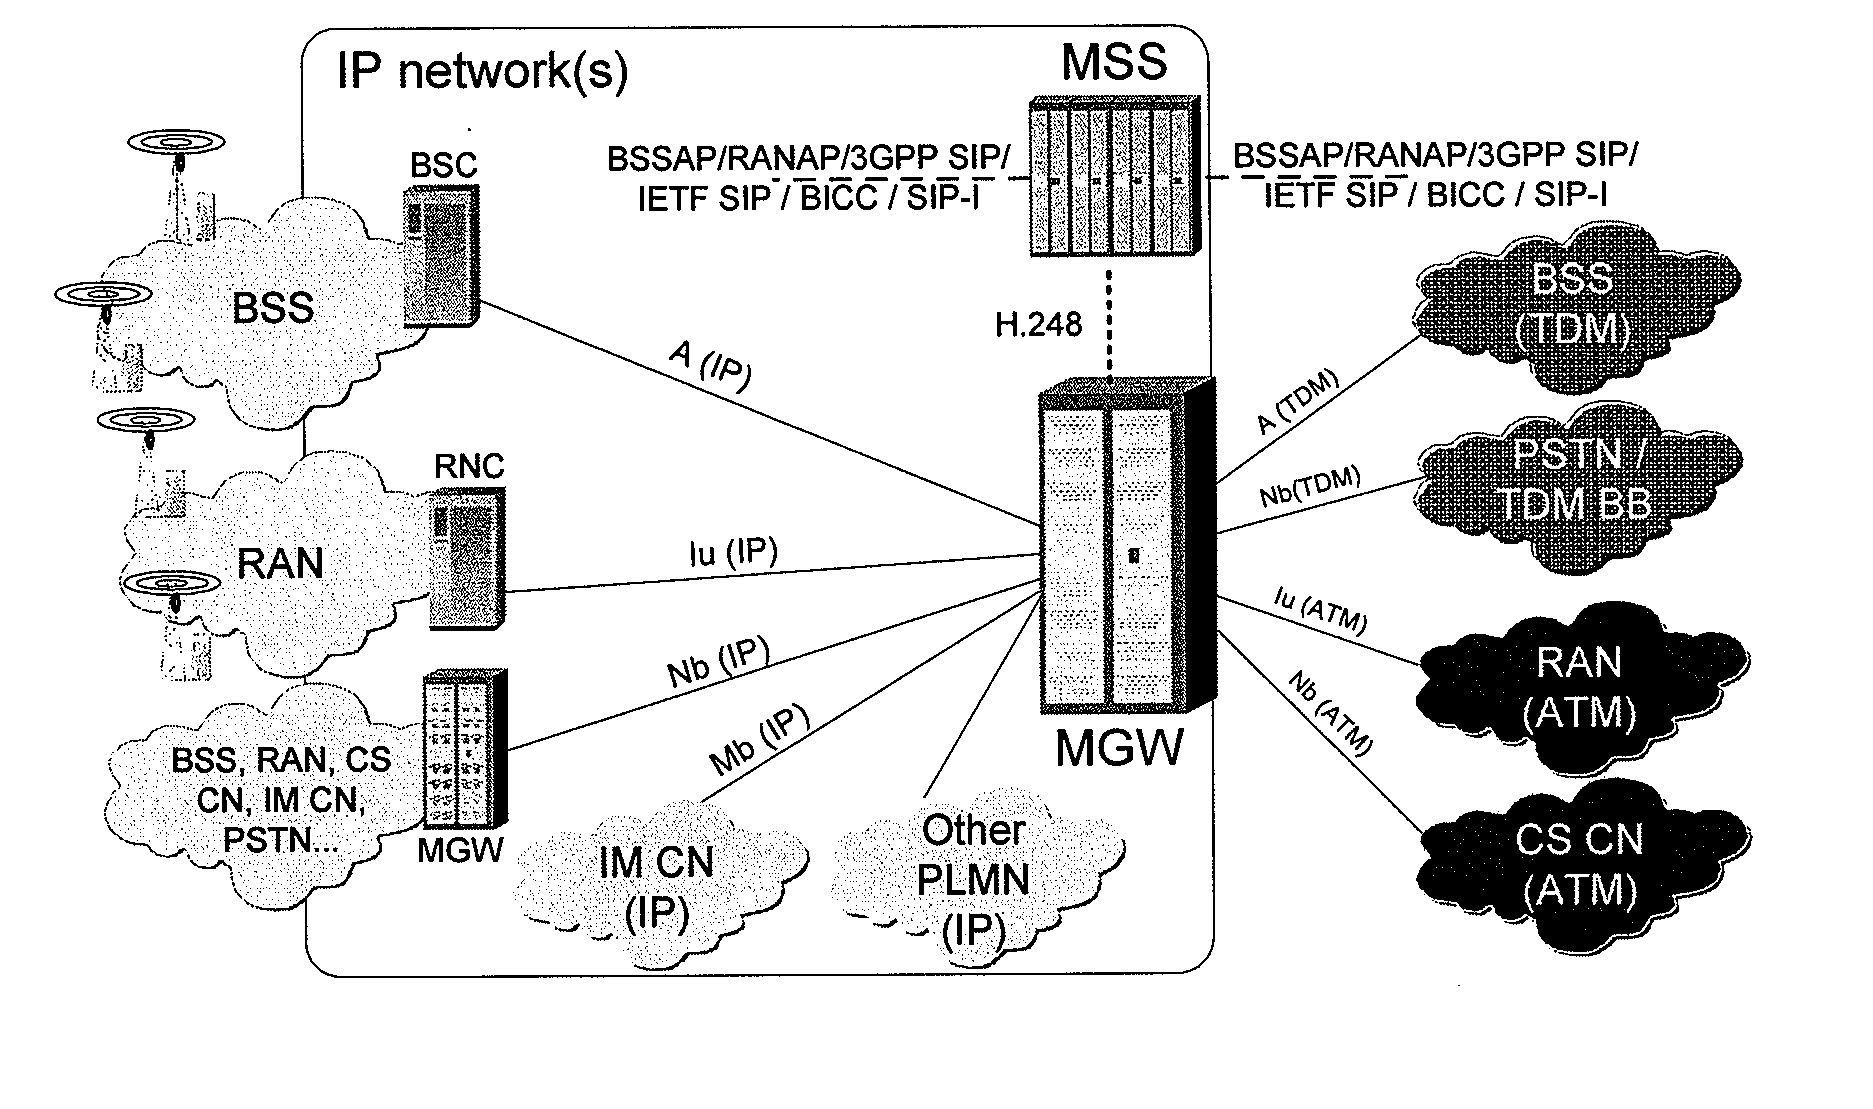 Different IP interfaces in a communication network system